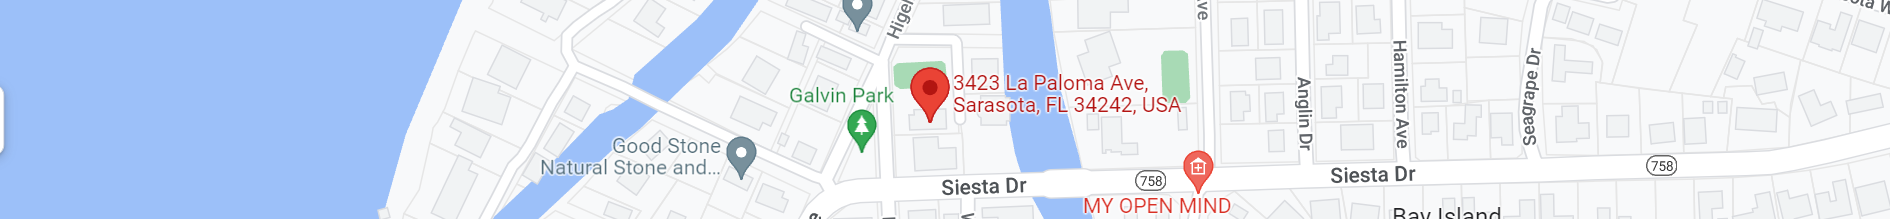 A map showing the location of a restaurant.